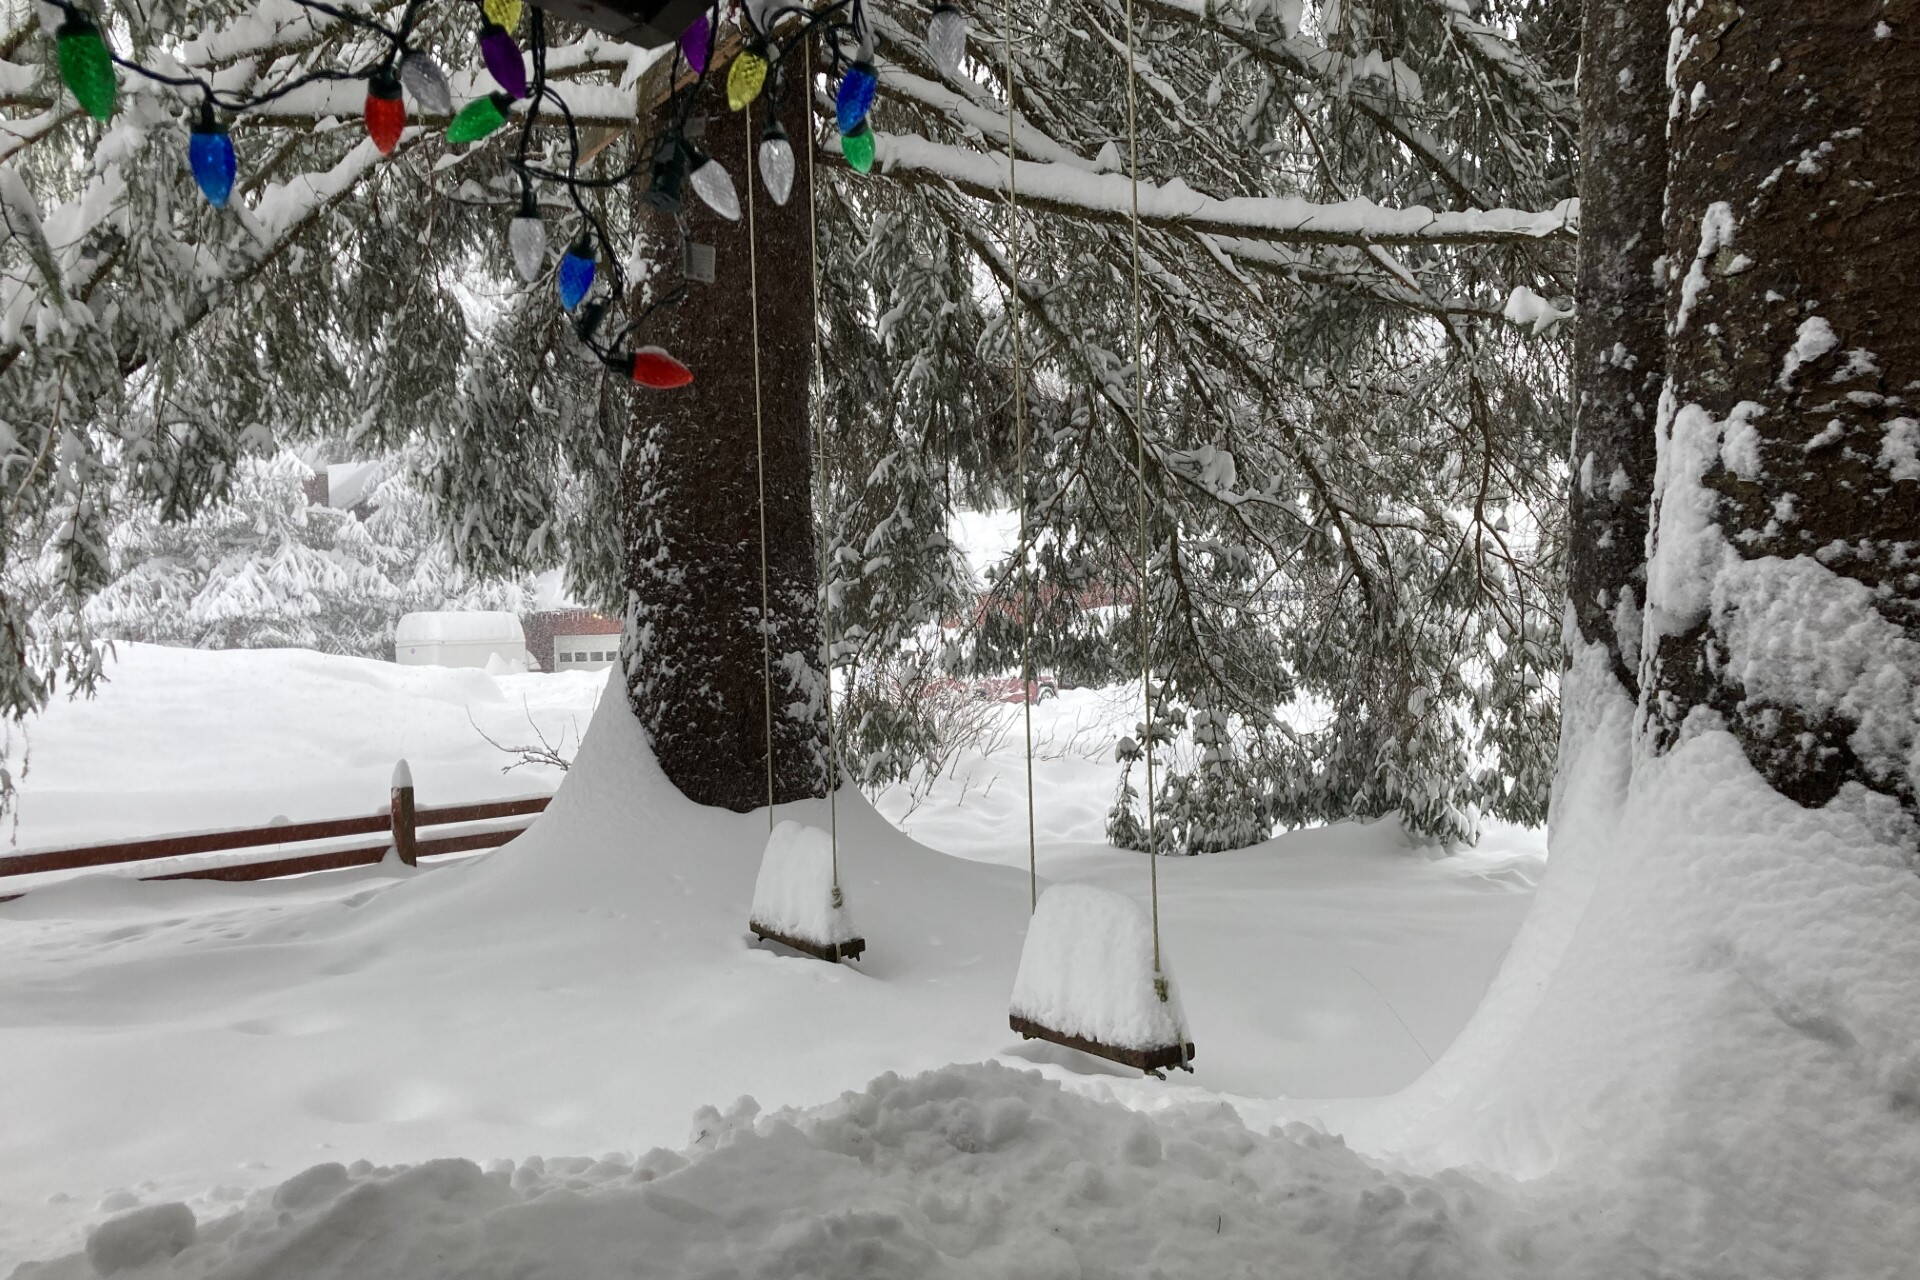 Holiday lights remain strung in a backyard covered with record snowfall a month after Christmas. (Photo by Peggy McKee Barnhill)